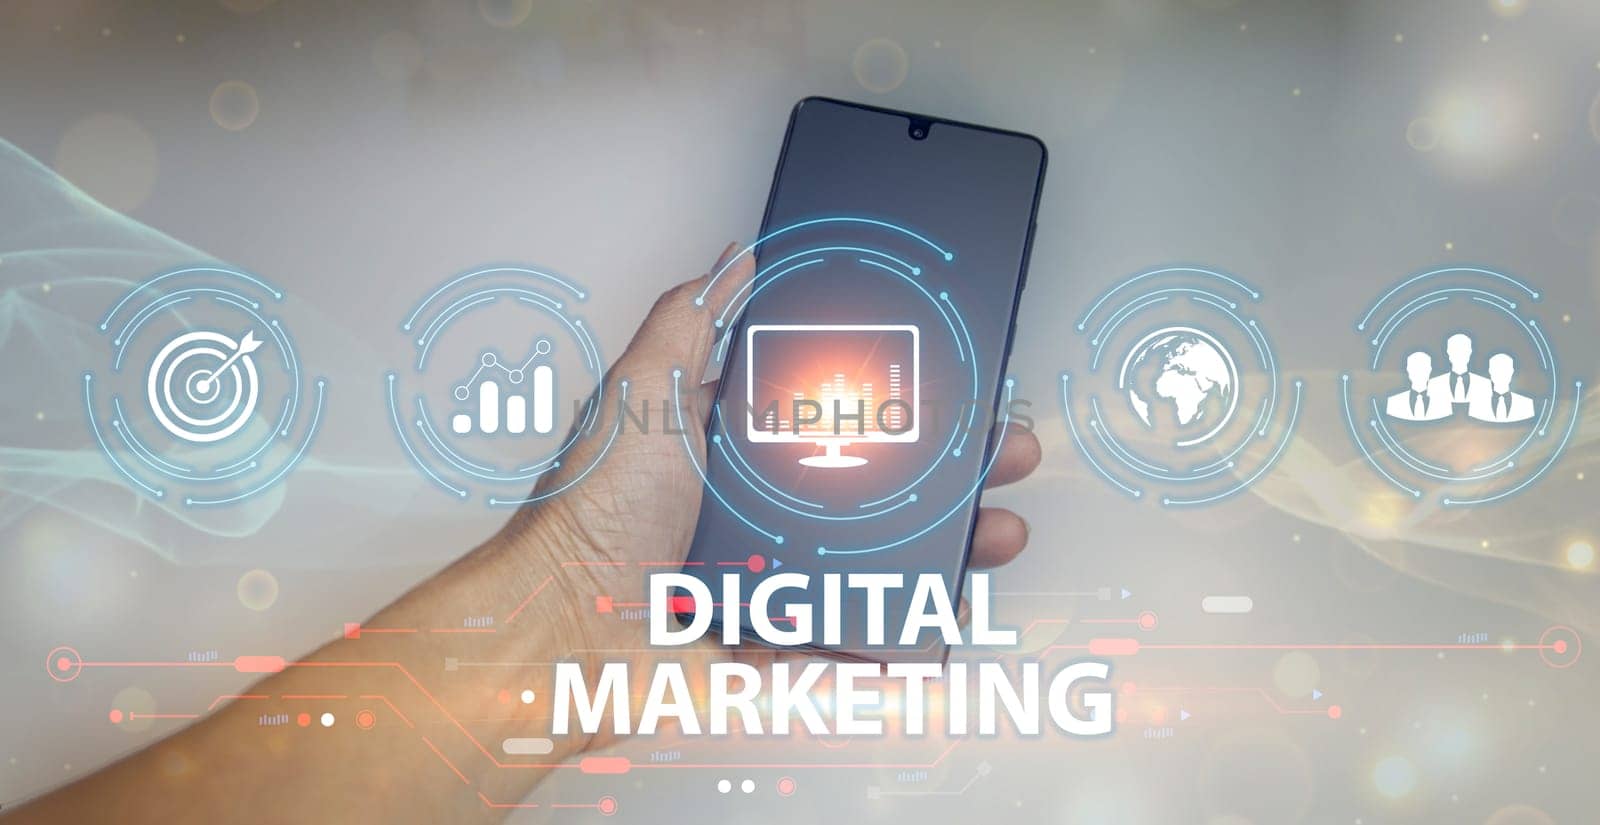 Hand holding a smartphone showing signs and icons of digital marketing Internet Advertising and Increased Sales business technology concept online marketing electronic business online business